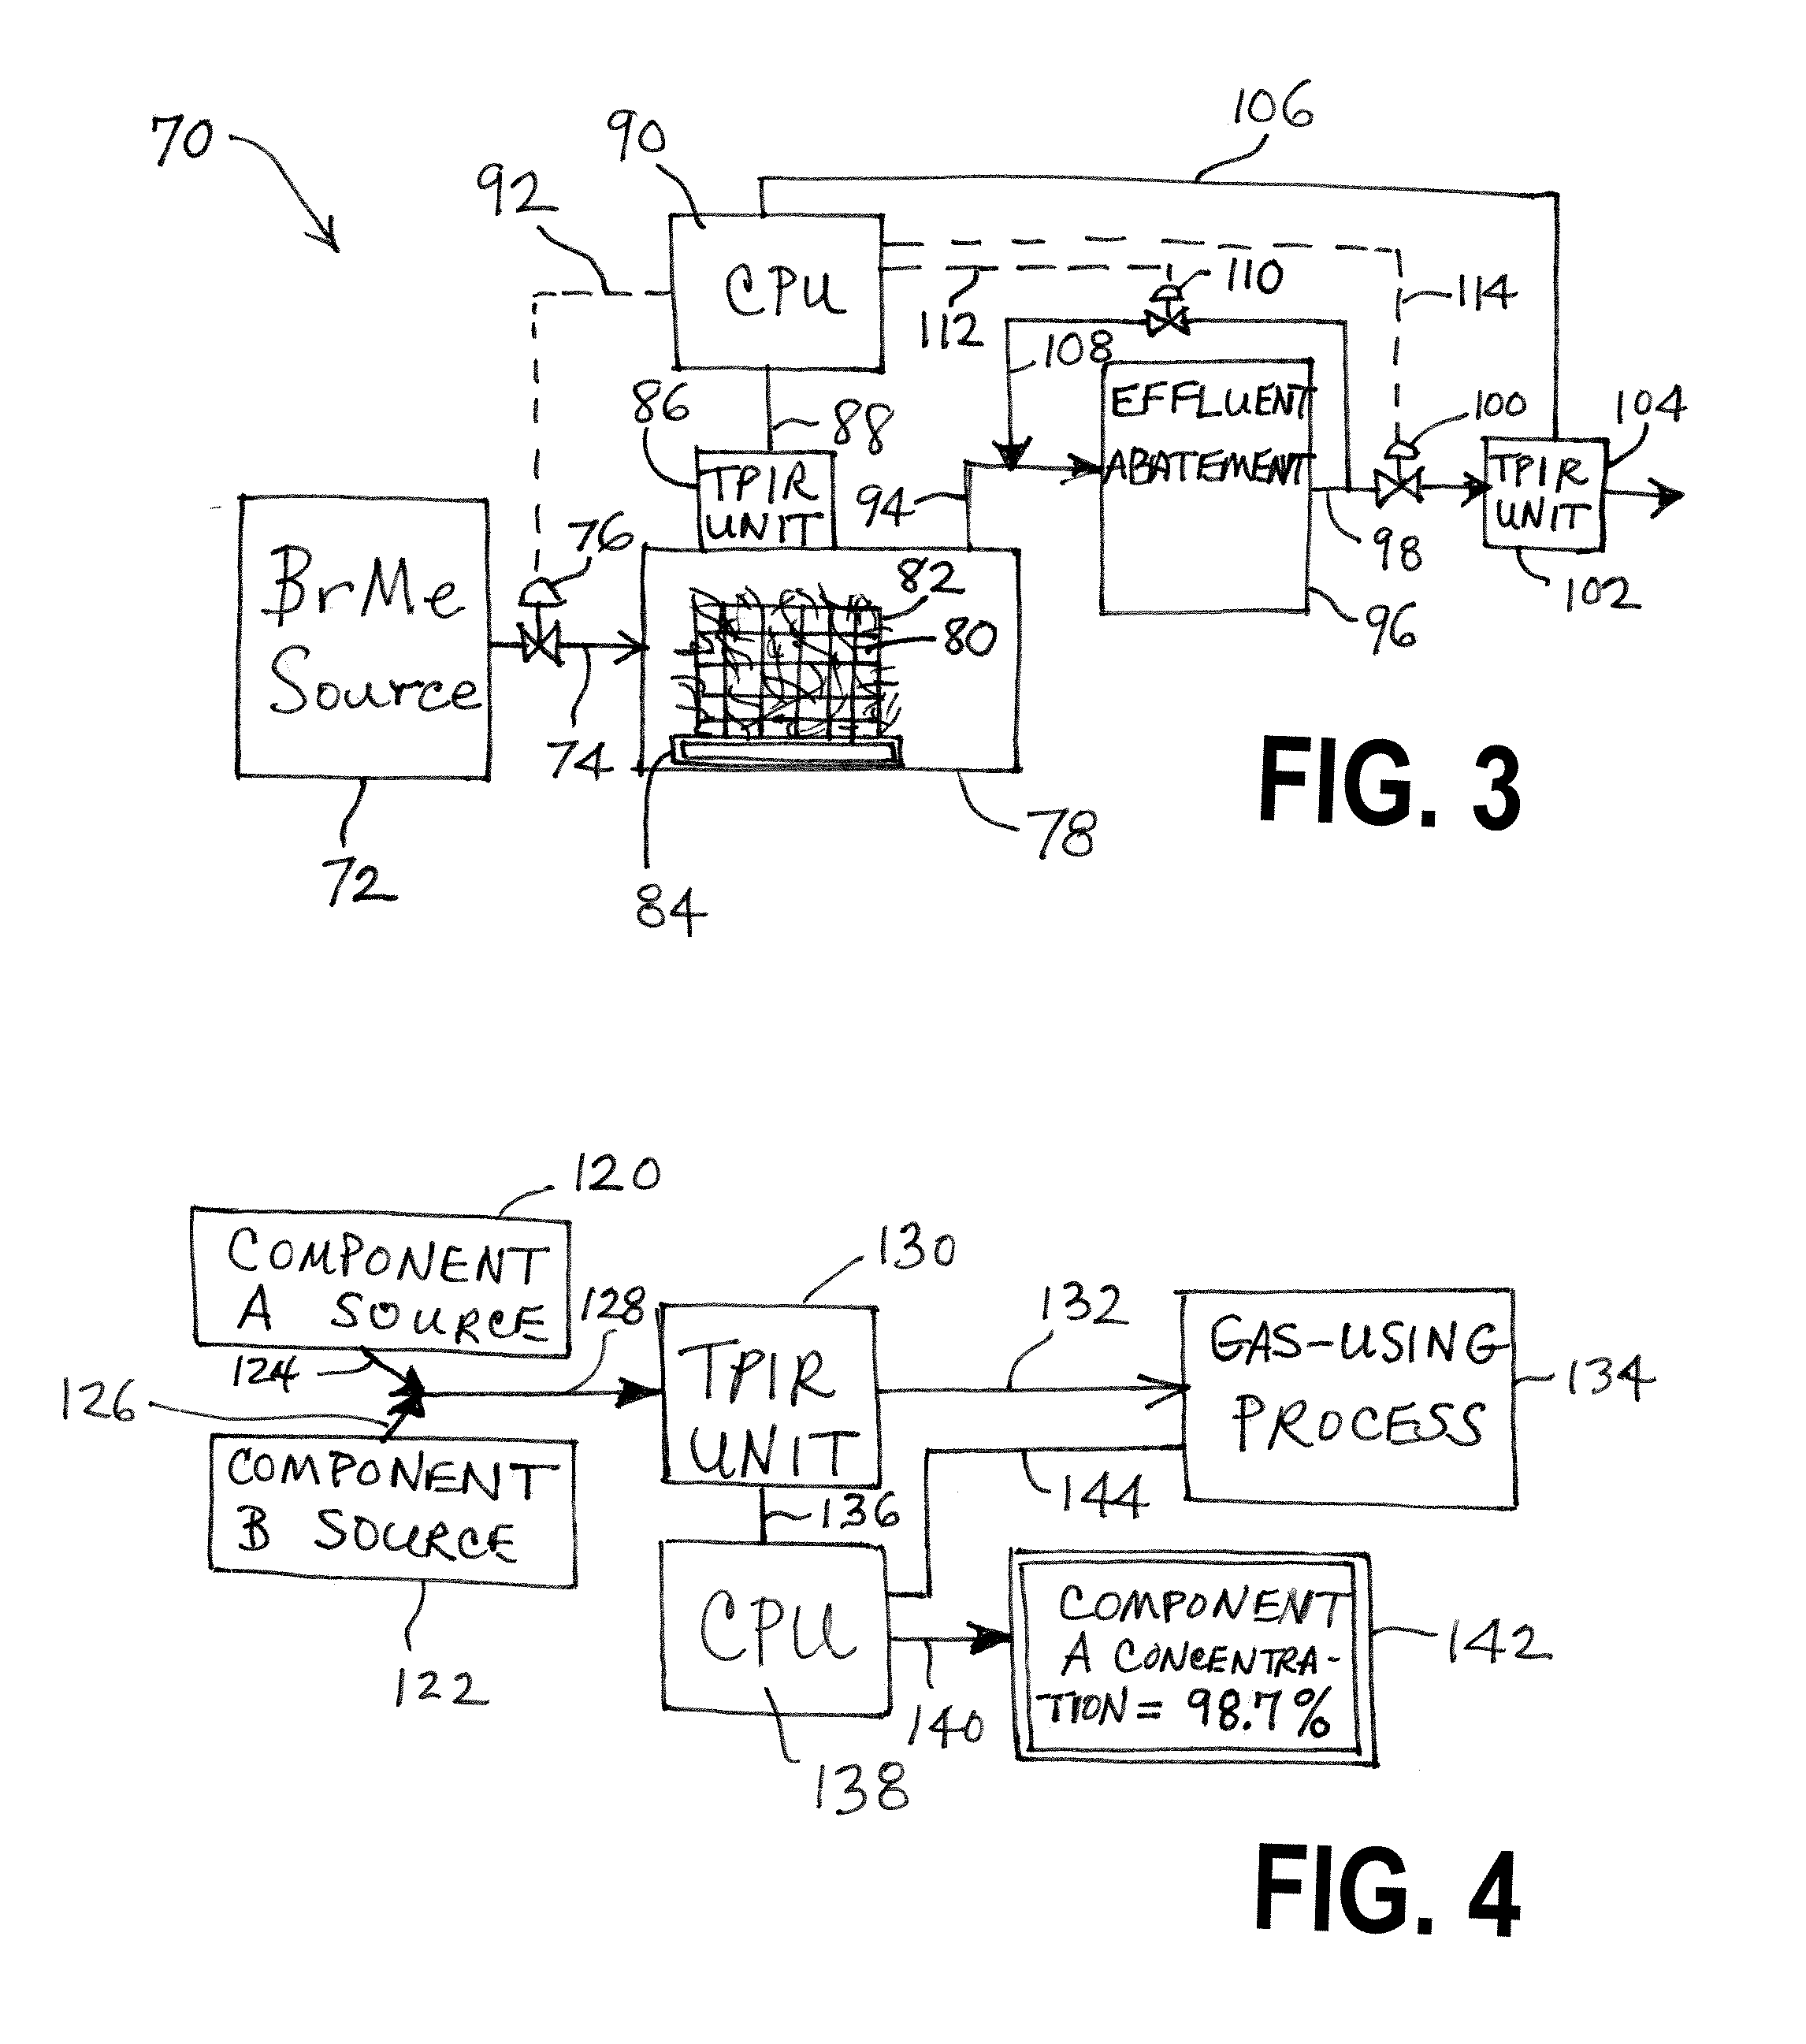 Infrared gas detection systems and methods